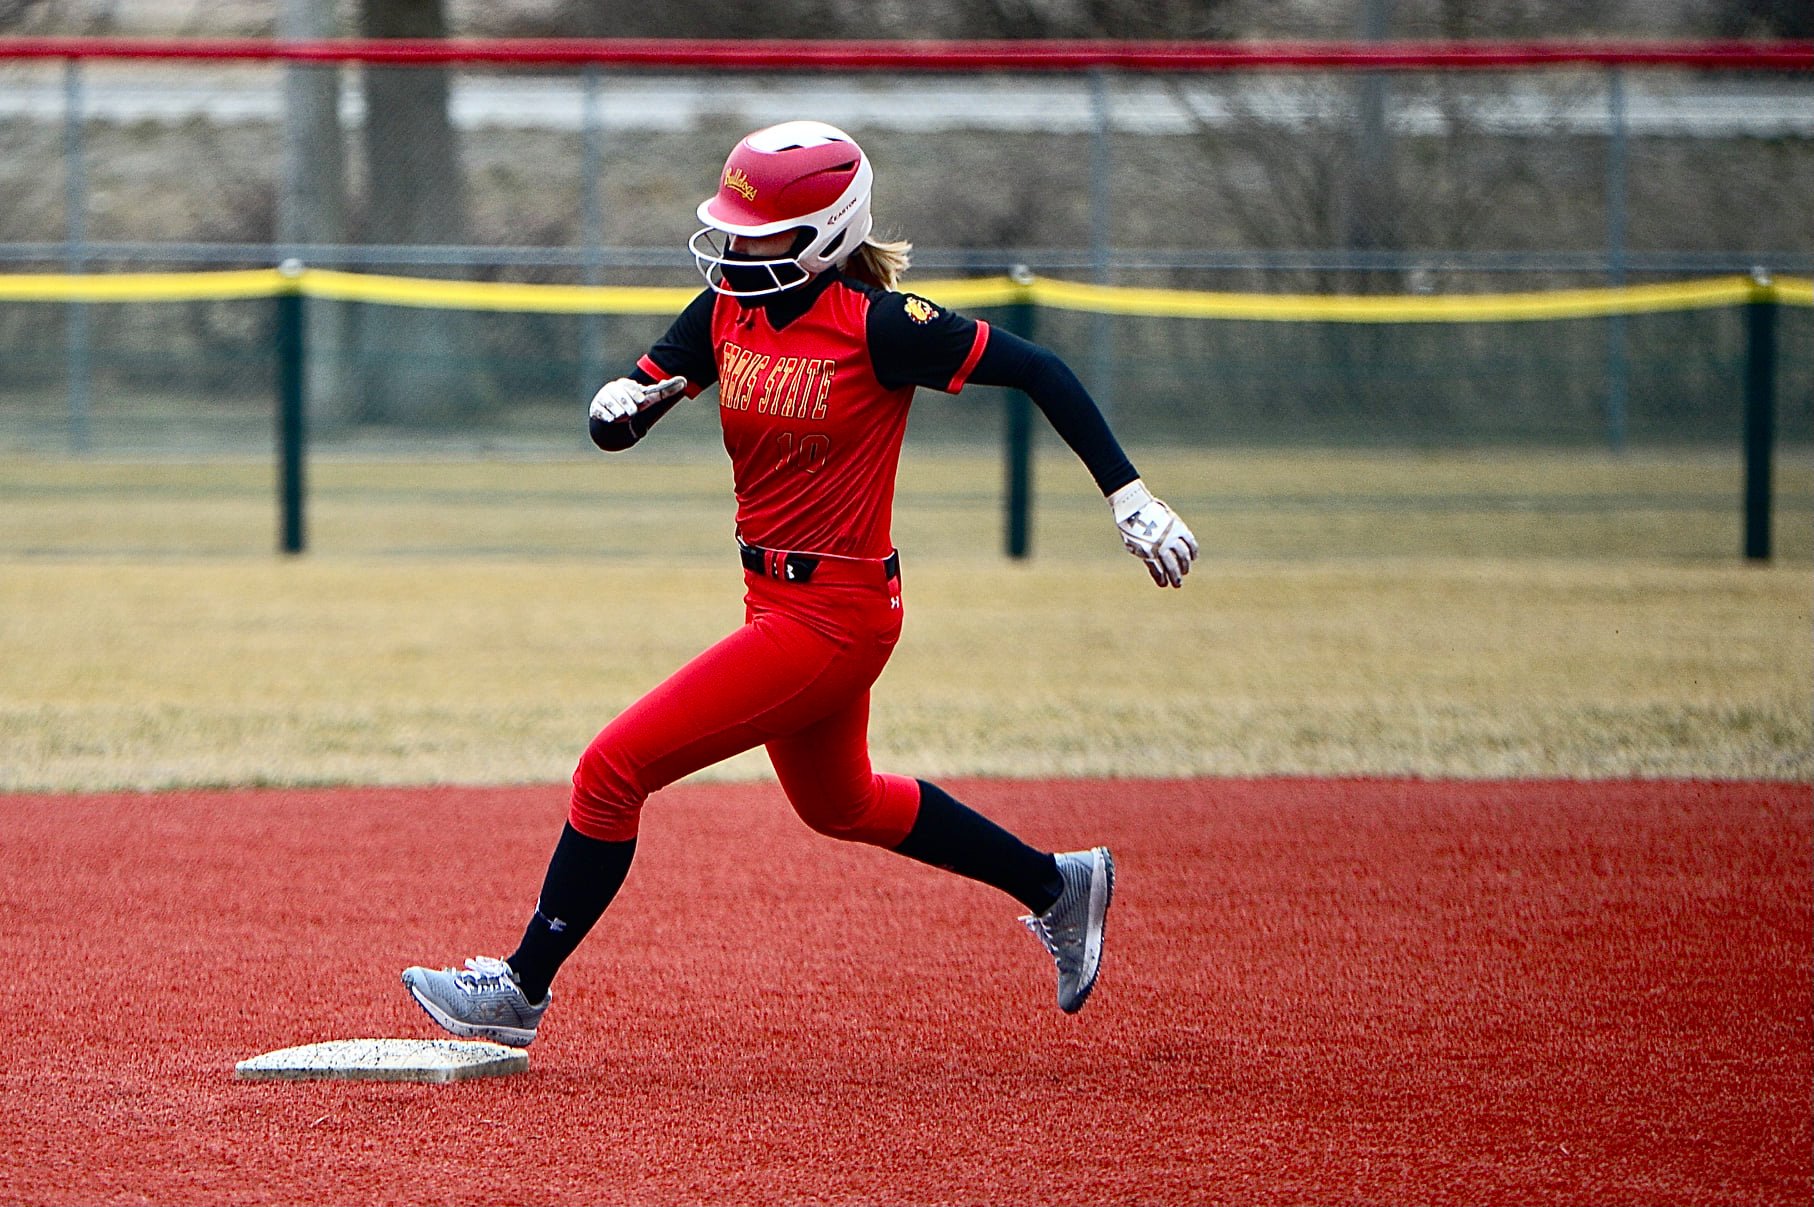 Ferris State Softball Posts Seventh Win In Last Eight Outings And Remains Perfect In Florida